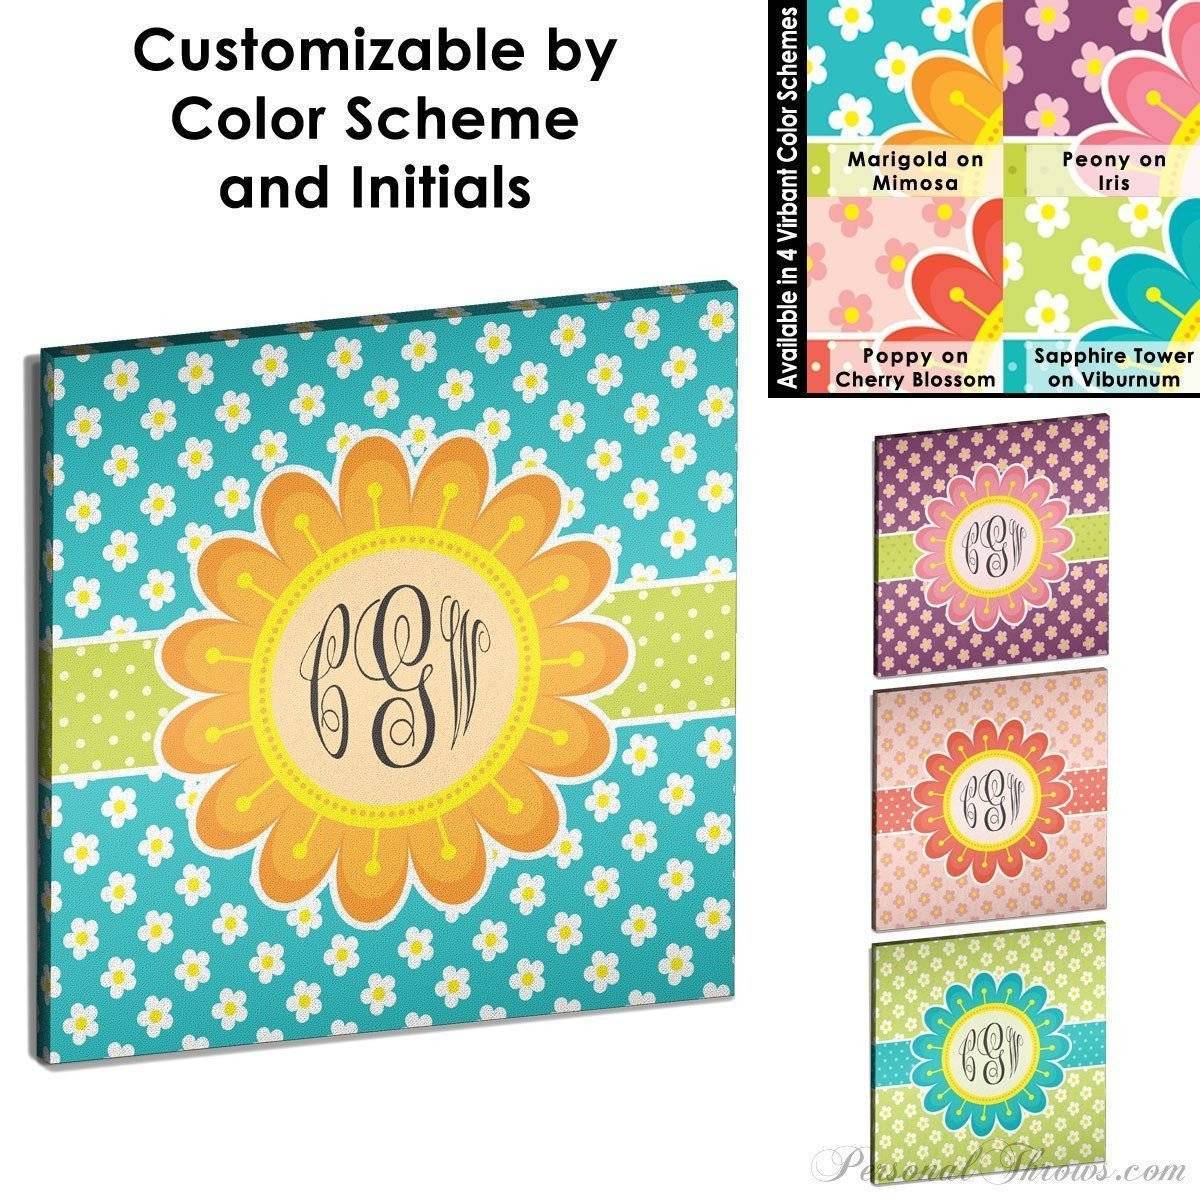 Monogrammed Gifts,Other Products - Blooming Spring Monogrammed 16" X 16" Canvas Gallery Wrap